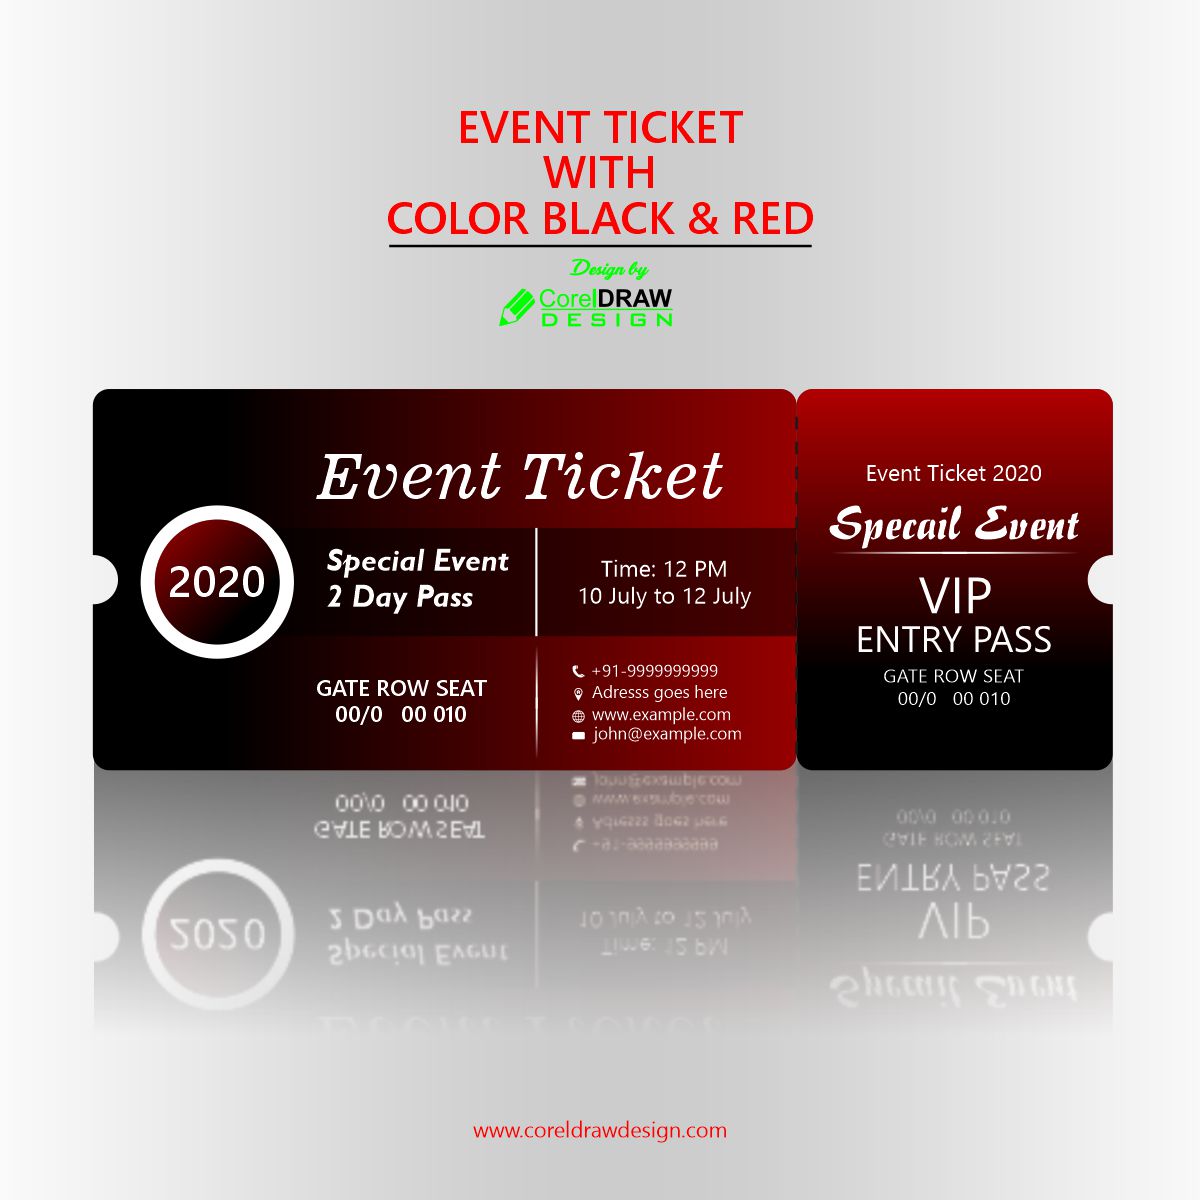 EVENT TICKET WITH COLOR BLACK & RED